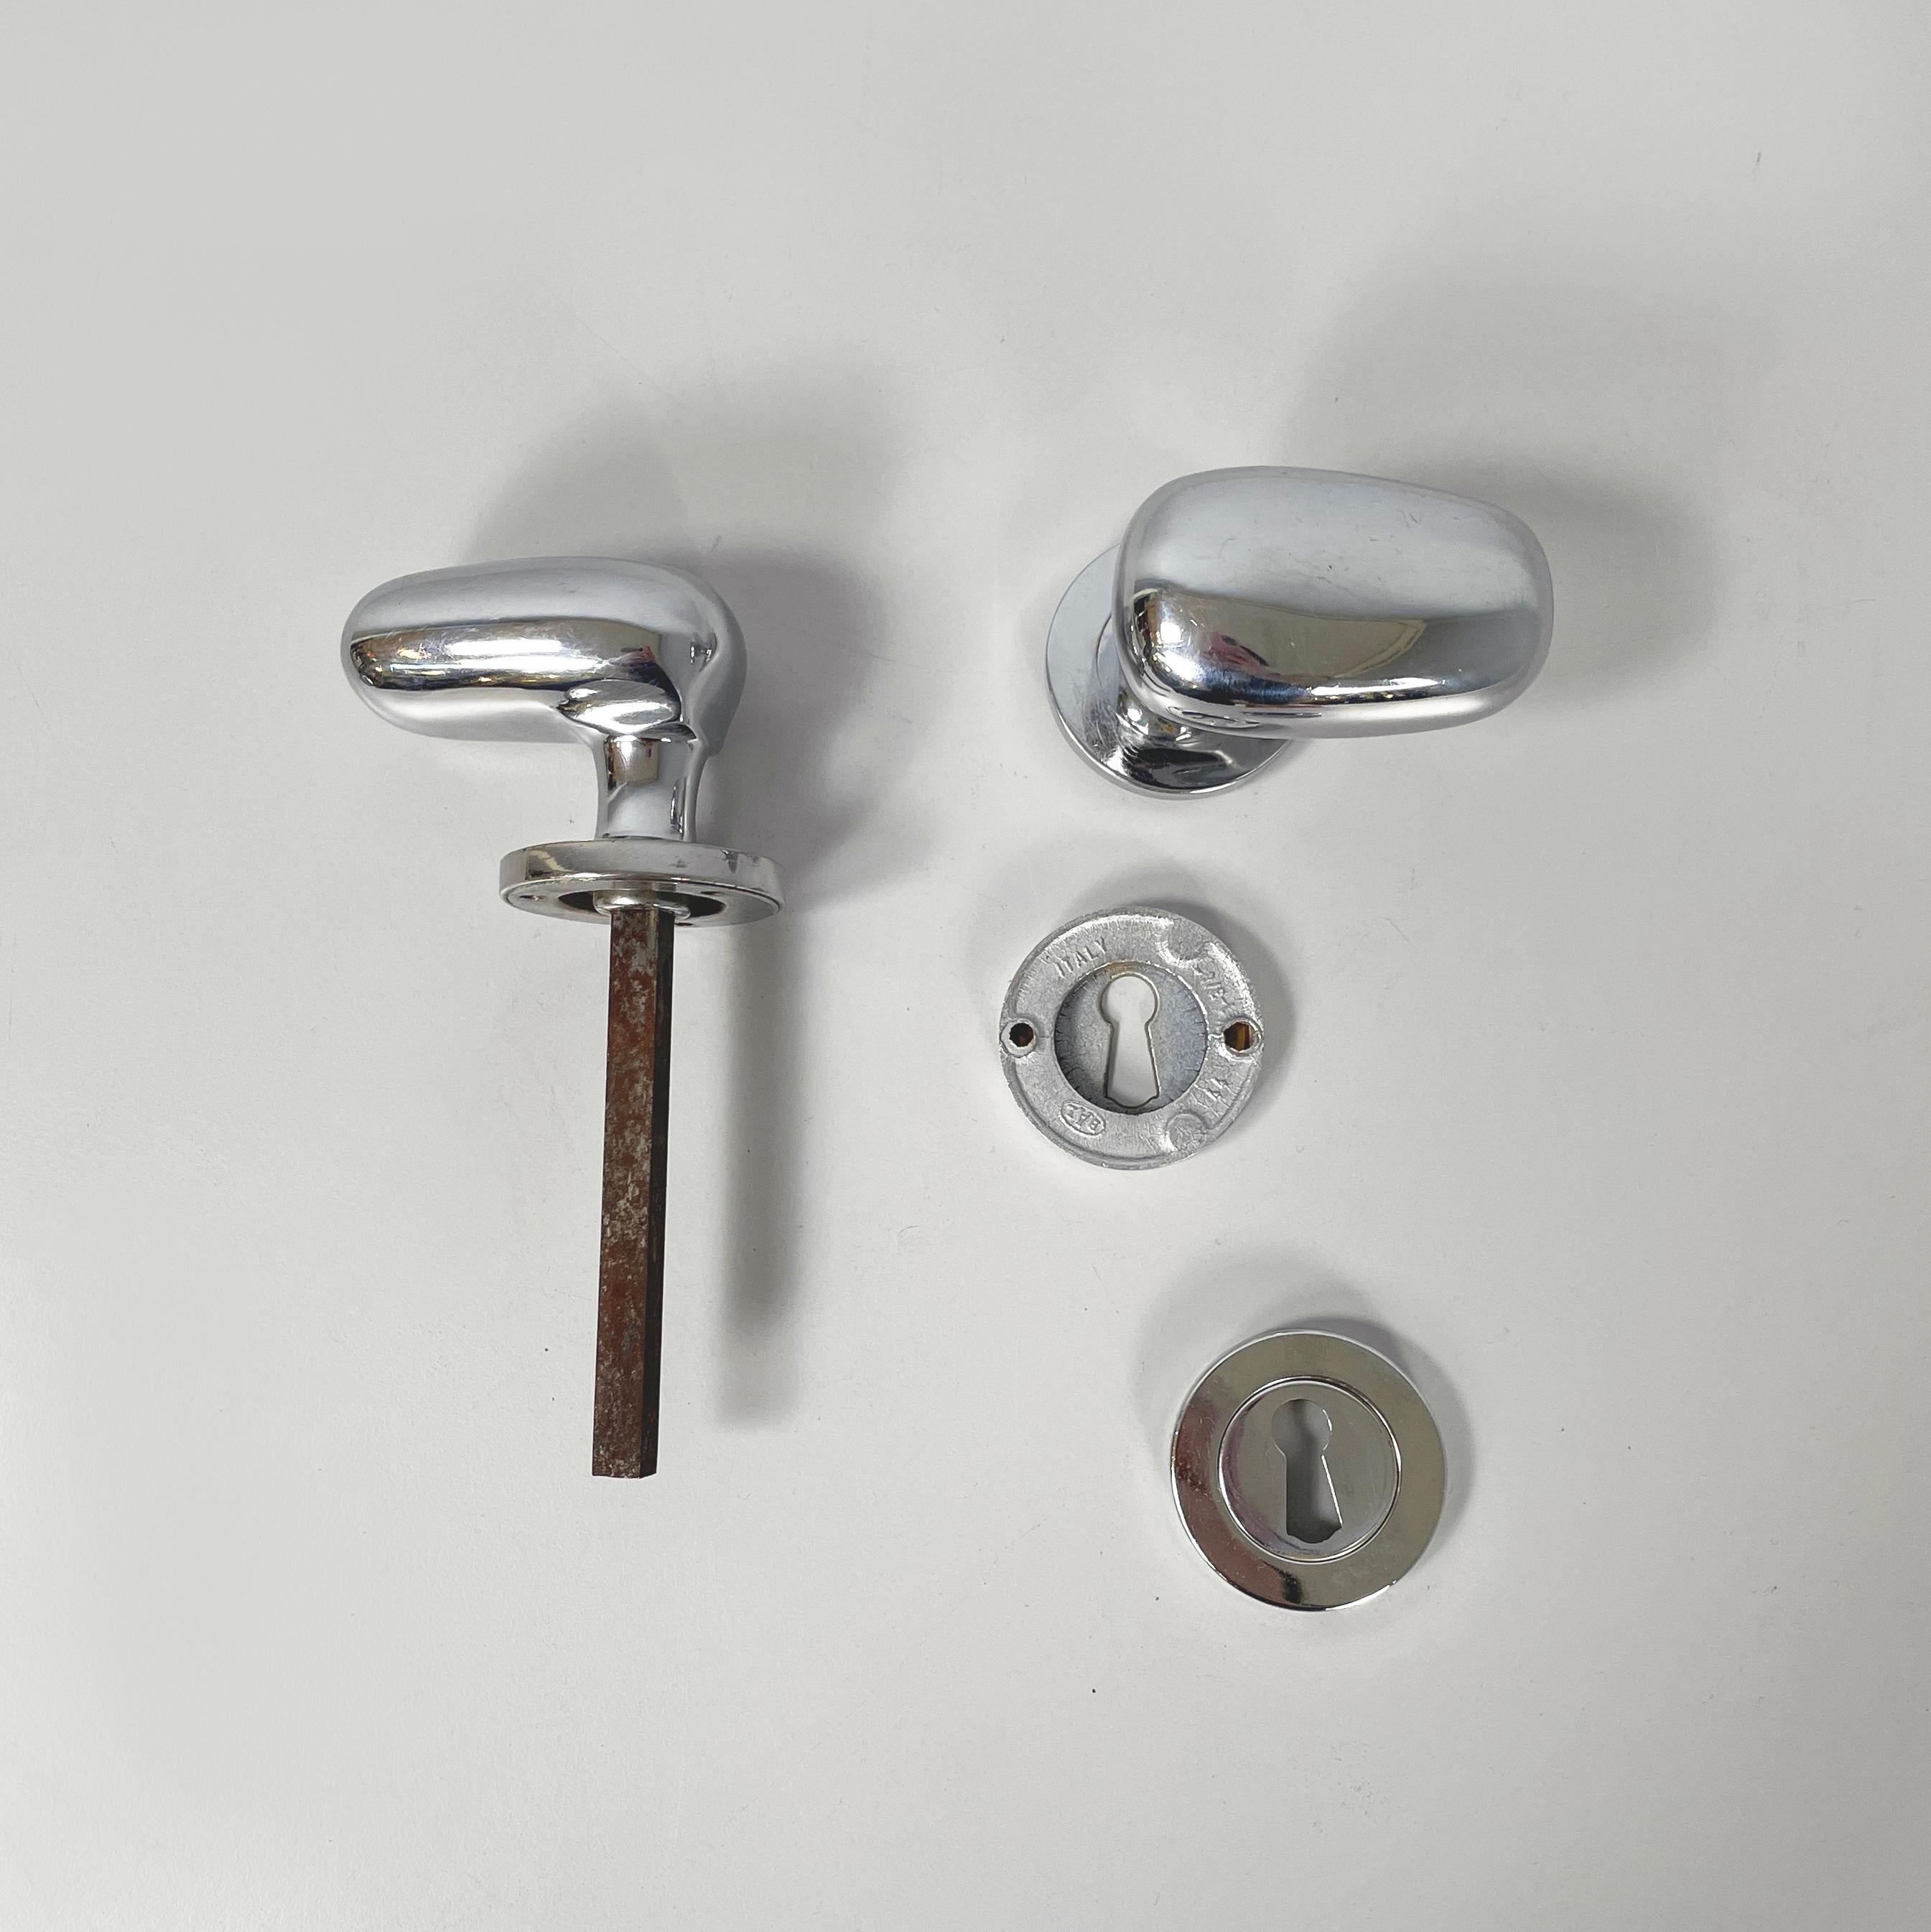 Italian mid-century modern Chromed metal handles and locks by Luigi Caccia Dominioni for Azucena, 1960s
Set of chromed metal 6 pairs of round base handles and 15 round locks. The knob has a rounded shape, which tends to tighten toward the